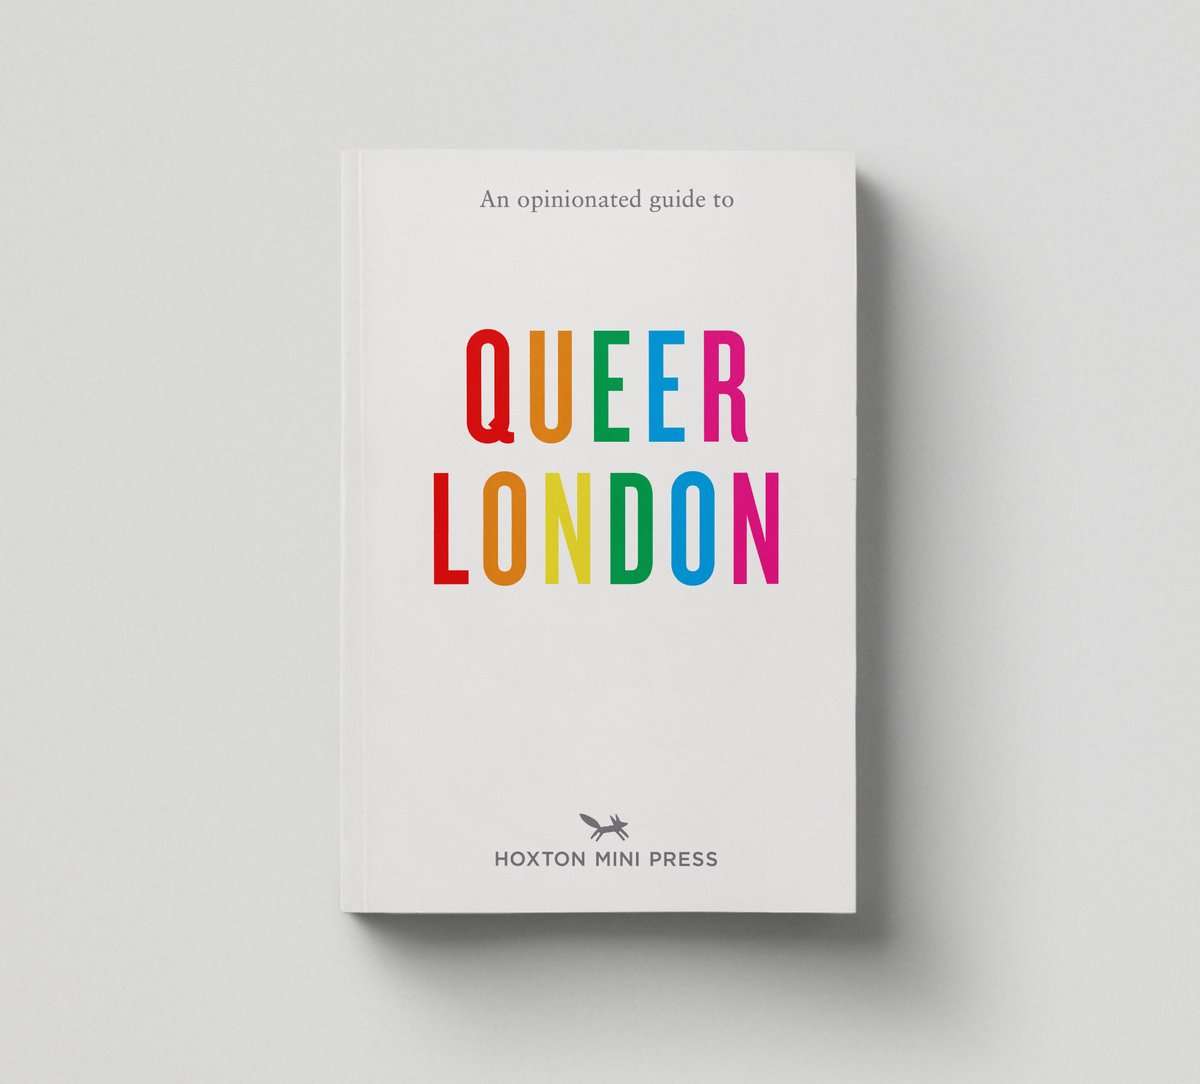 Thrilled to have one of my images of @2BrewersClapham in the brand new 'An Opinionated Guide to Queer London' from @HoxtonMiniPress #queerlondon #queerphotographer 📷 ©️ @ChrisJepson